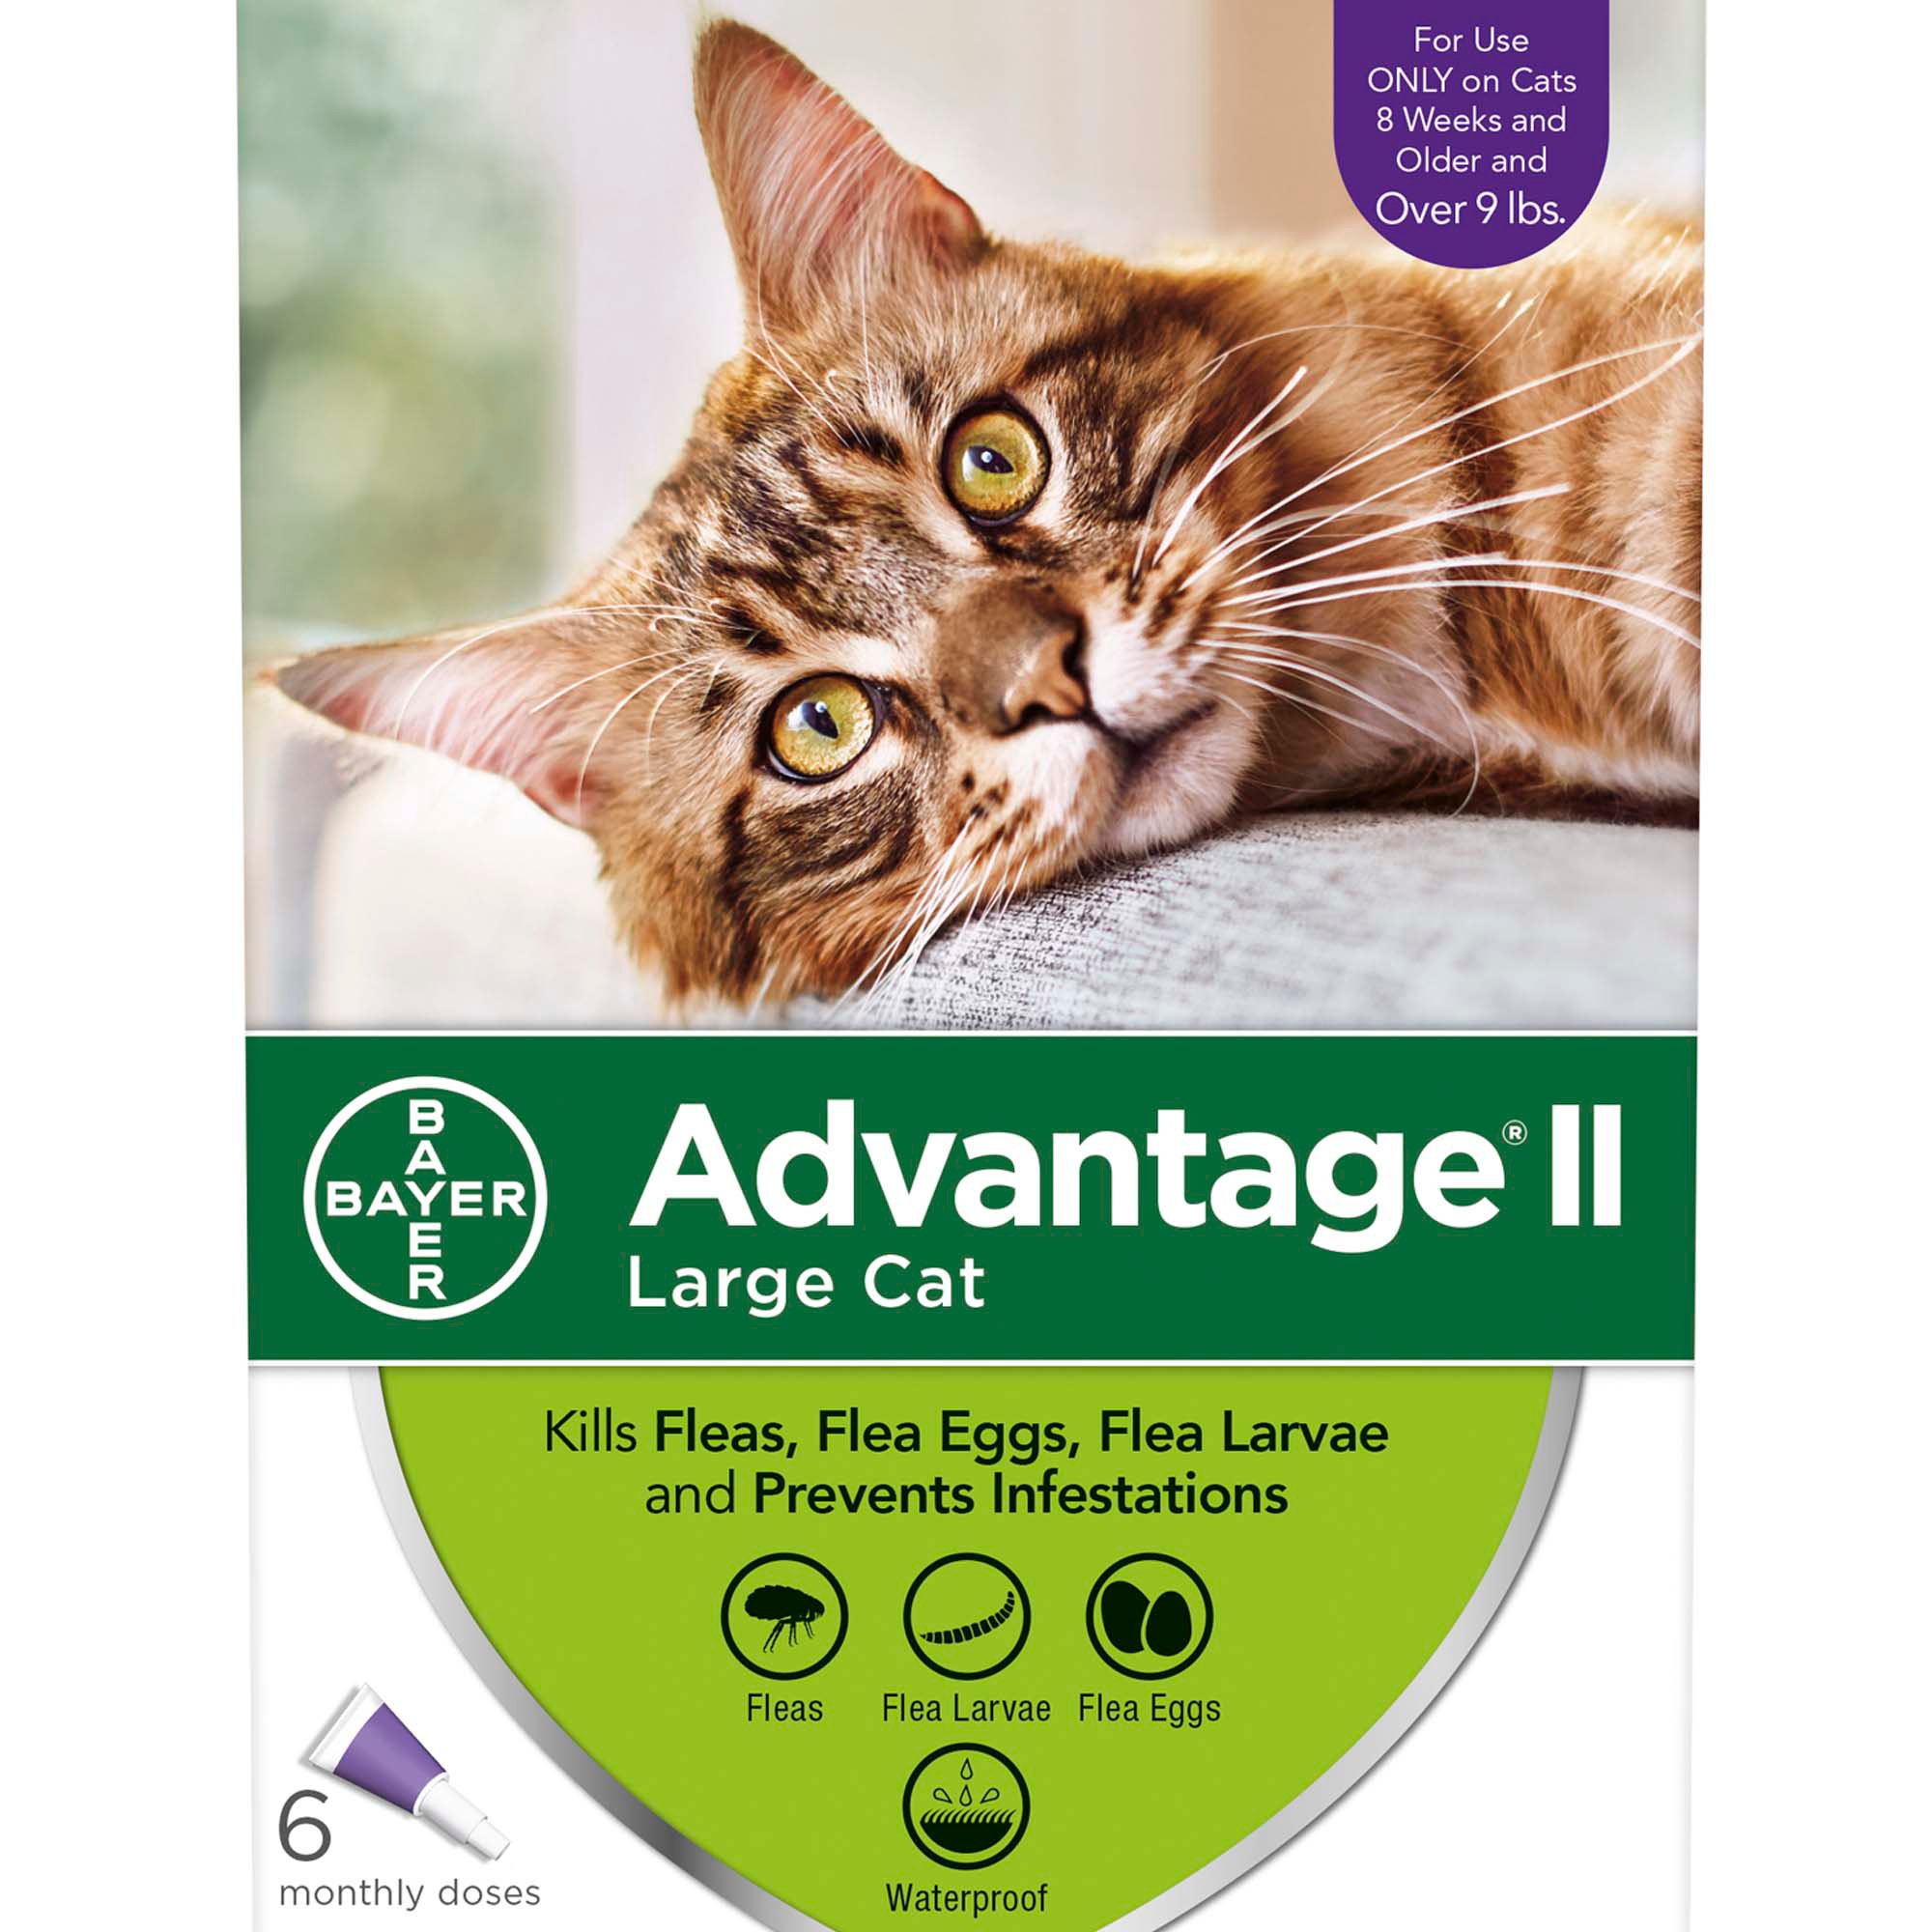 Advantage II OnceAMonth Cat & Kitten Topical Flea Treatment Over 9